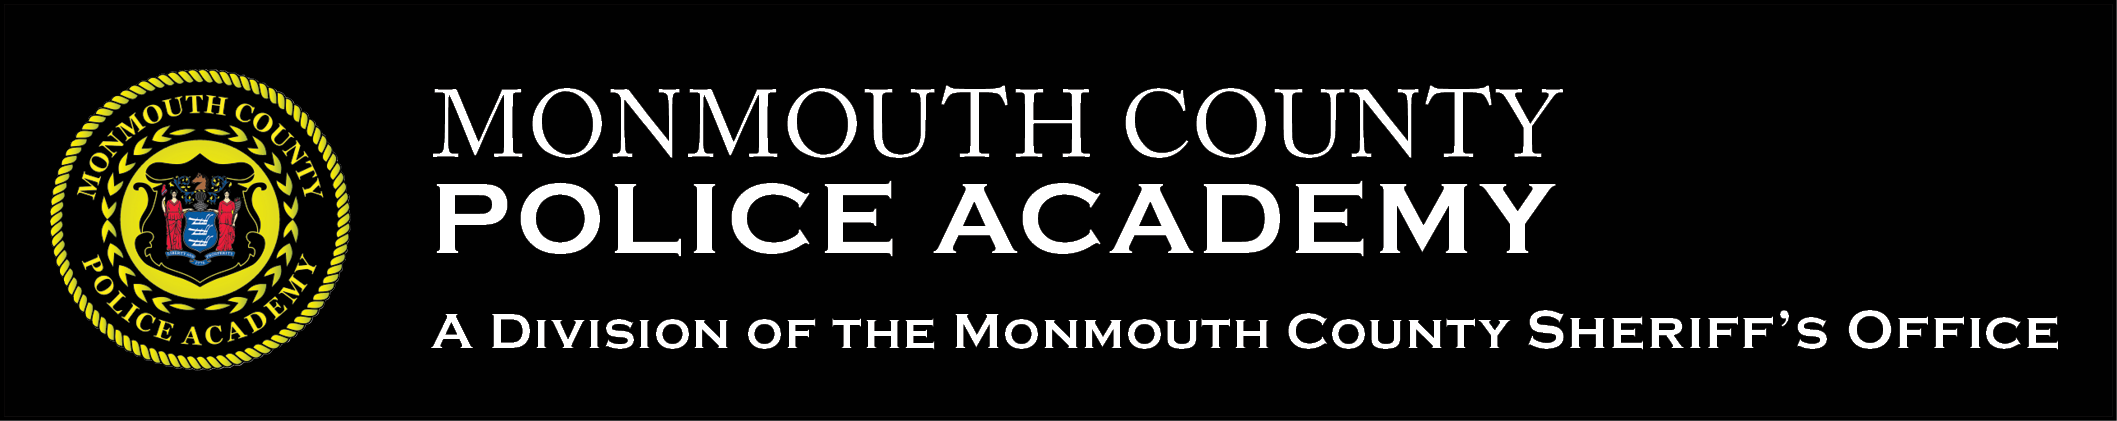 Monmouth County Police Academy